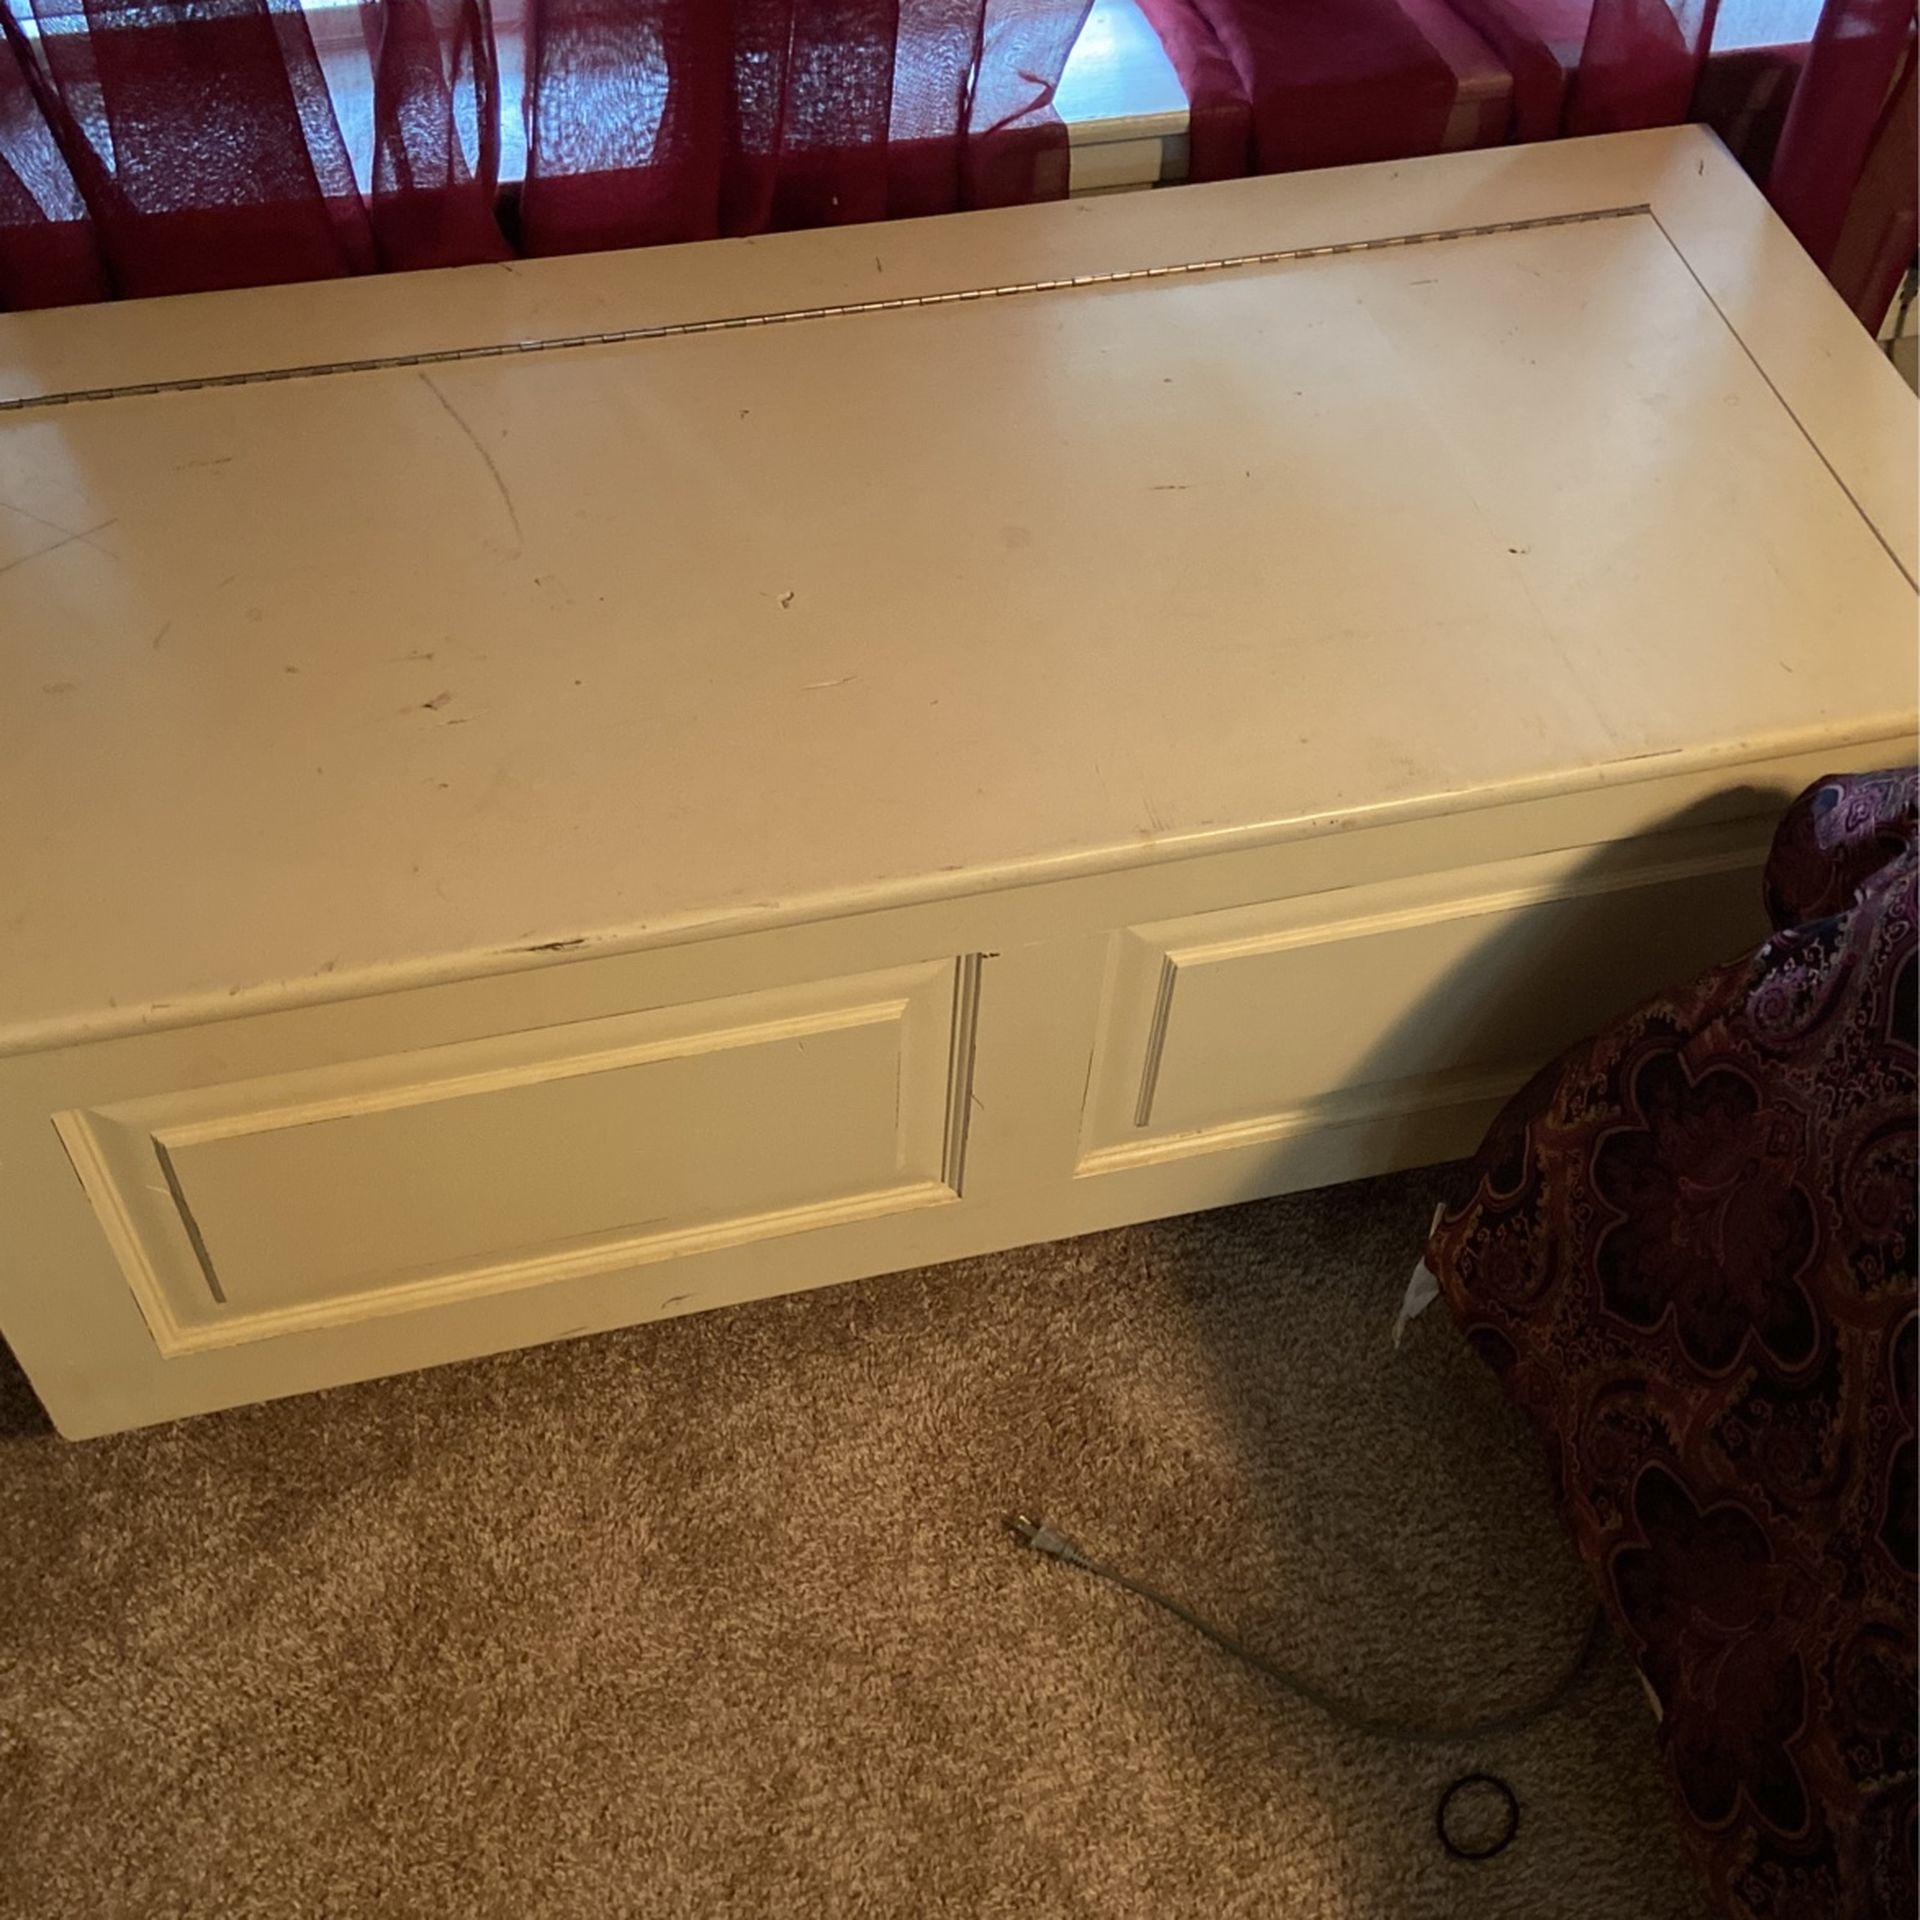 Toy Chest Or Drawer